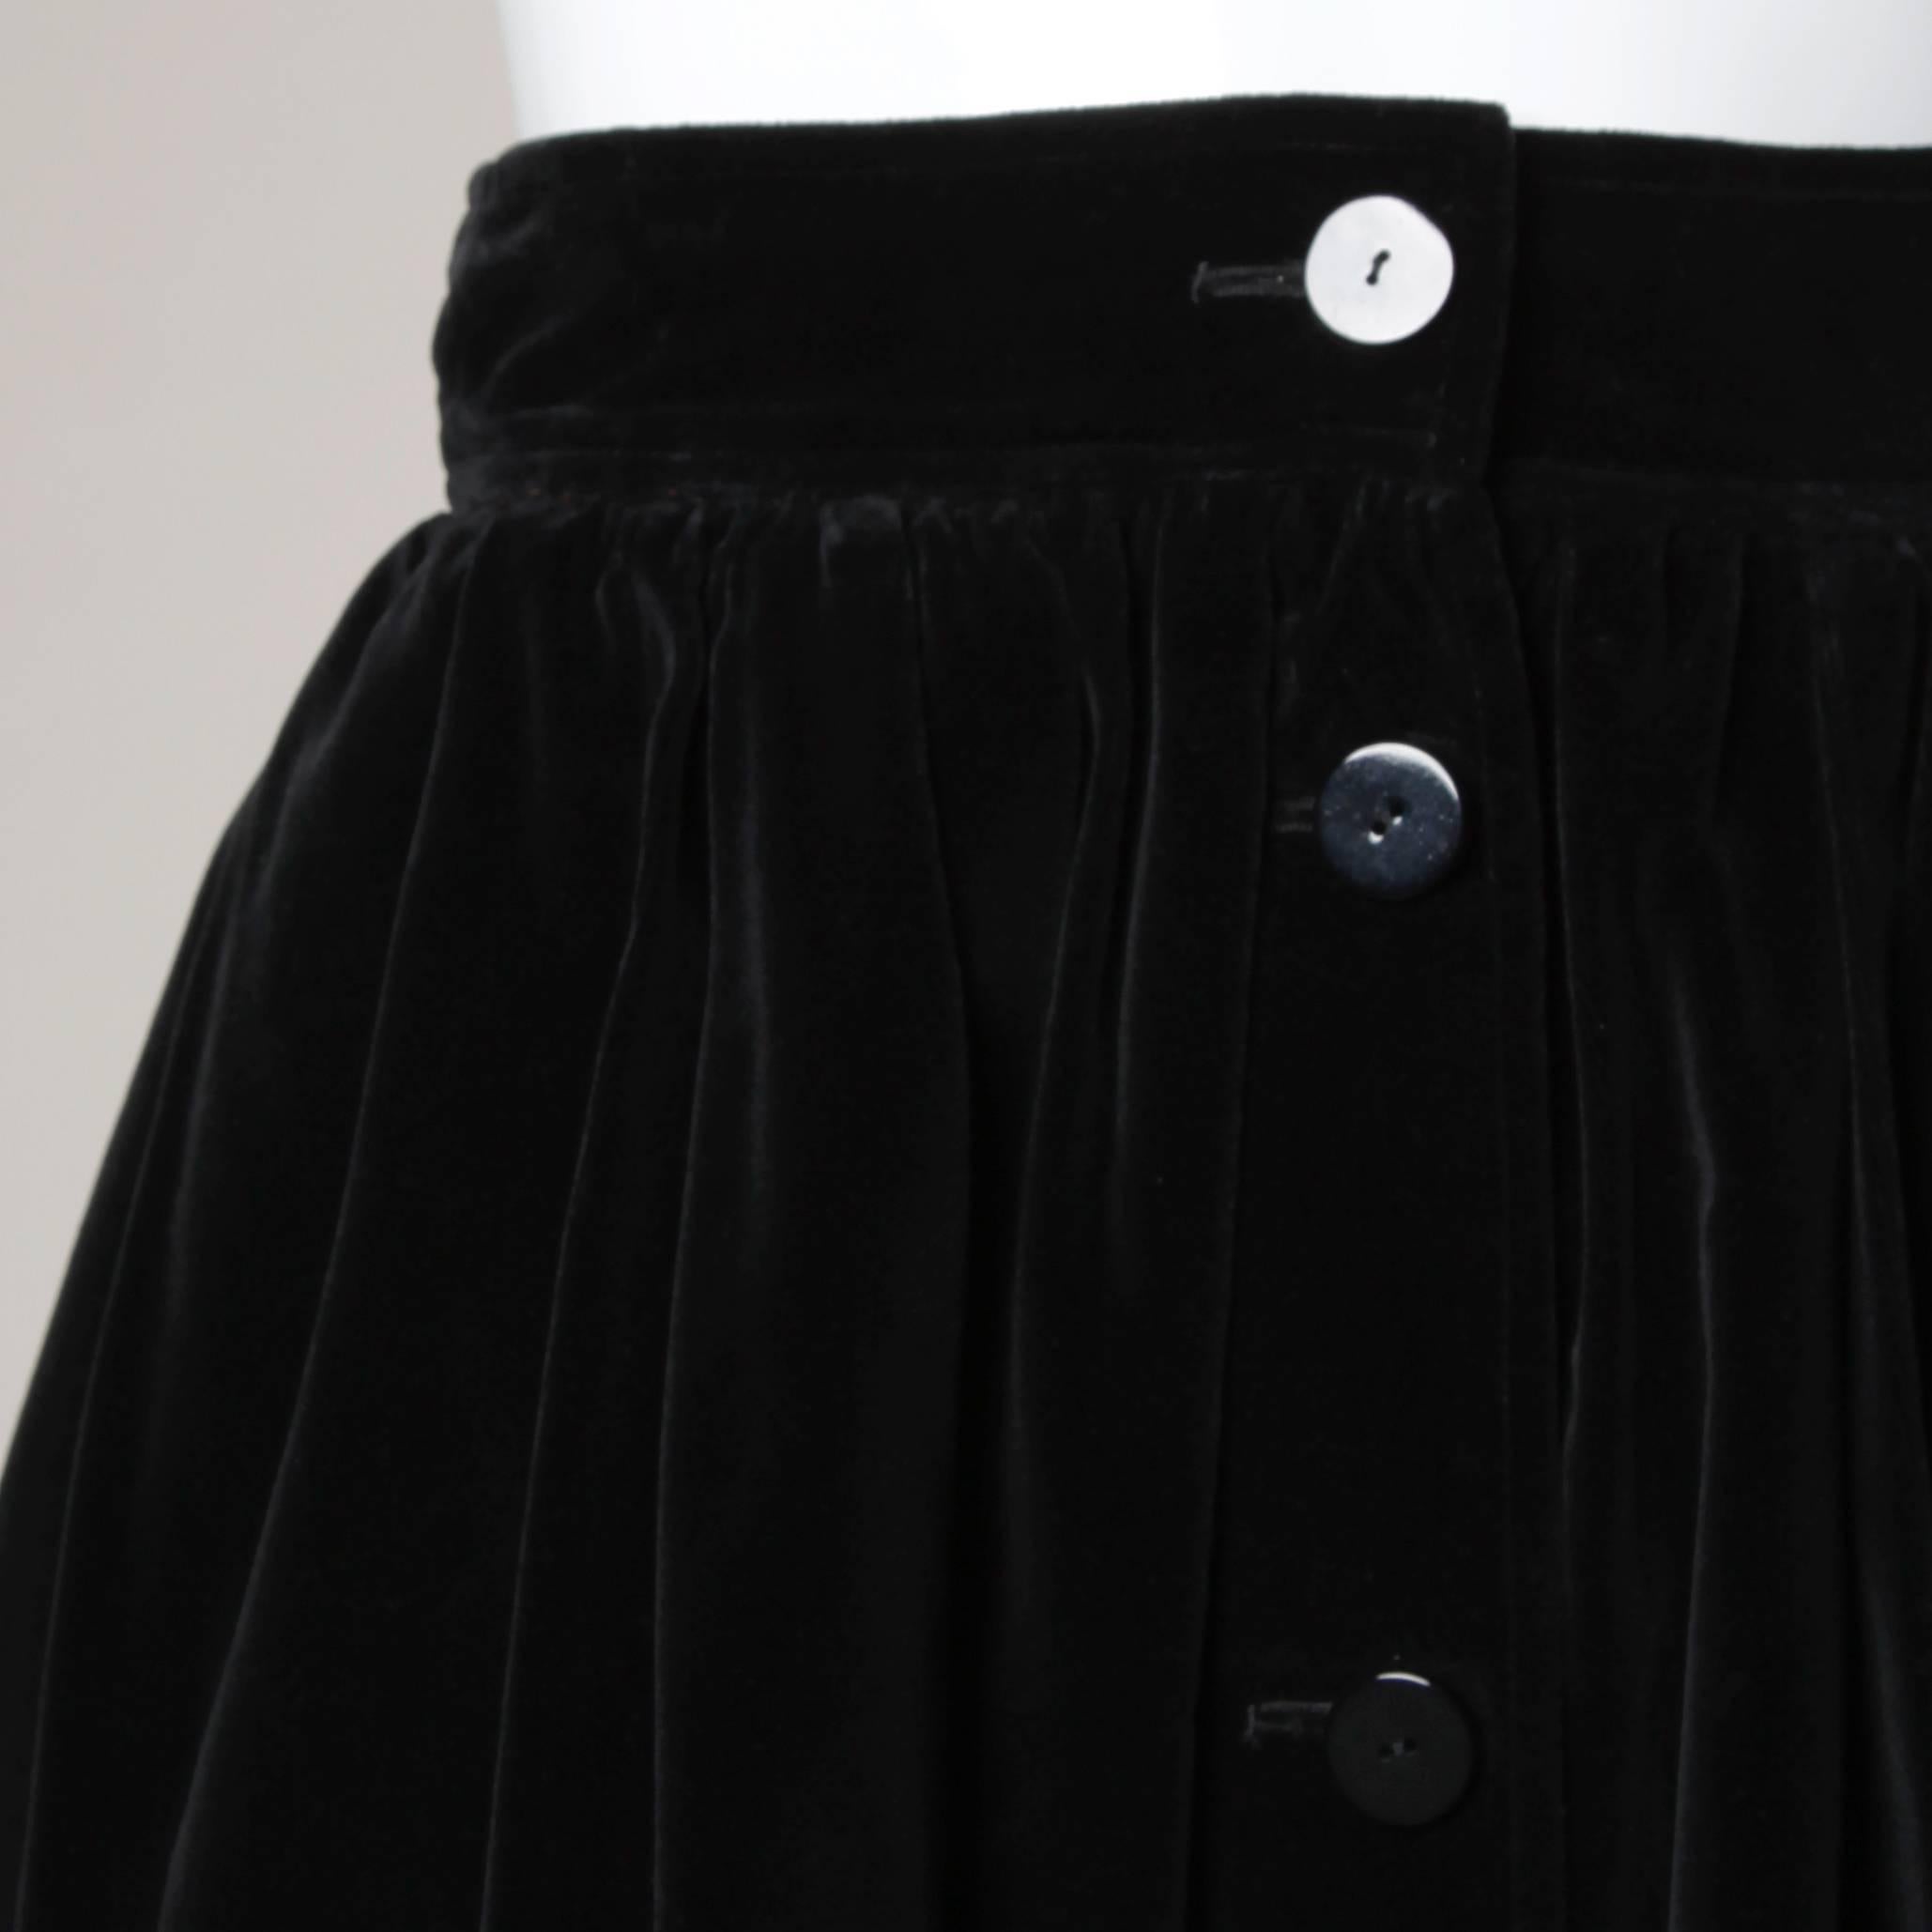 Simple and chic velvet skirt with a button up front by Yves Saint Laurent Rive Gauche.

Details:

Fully Lined
Side Pockets
Front Button and Hook Closure 
Marked Size: F 38
Estimated Size: Small
Color: Black 
Fabric: Velvet
Label: Yves